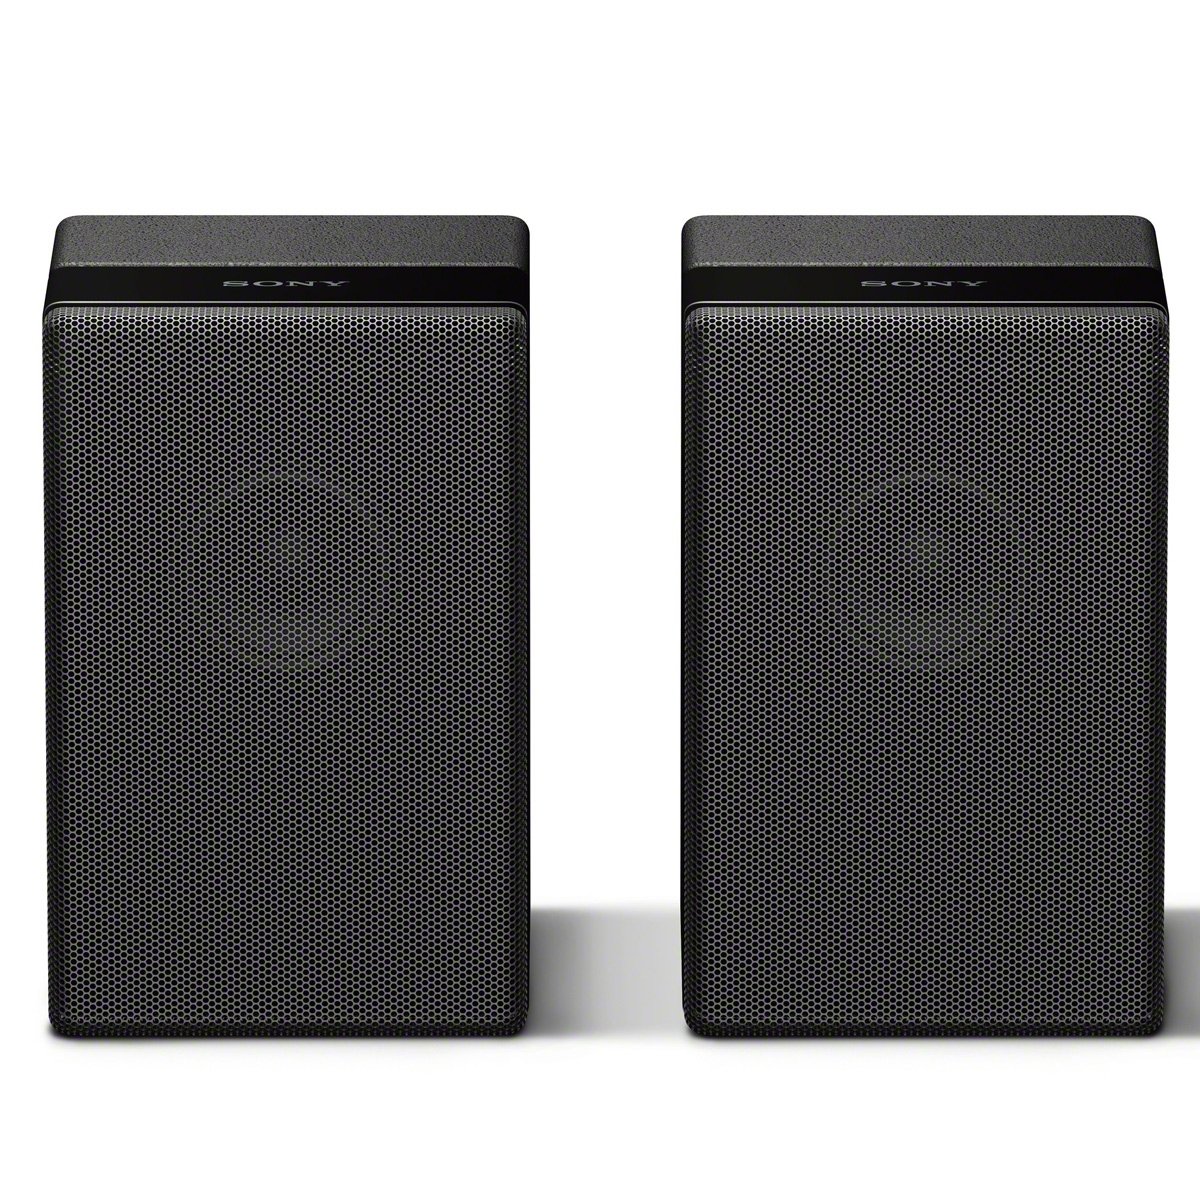 Sony SA-Z9R Wireless Rear Speakers for HT-Z9F - Pair - Record Players